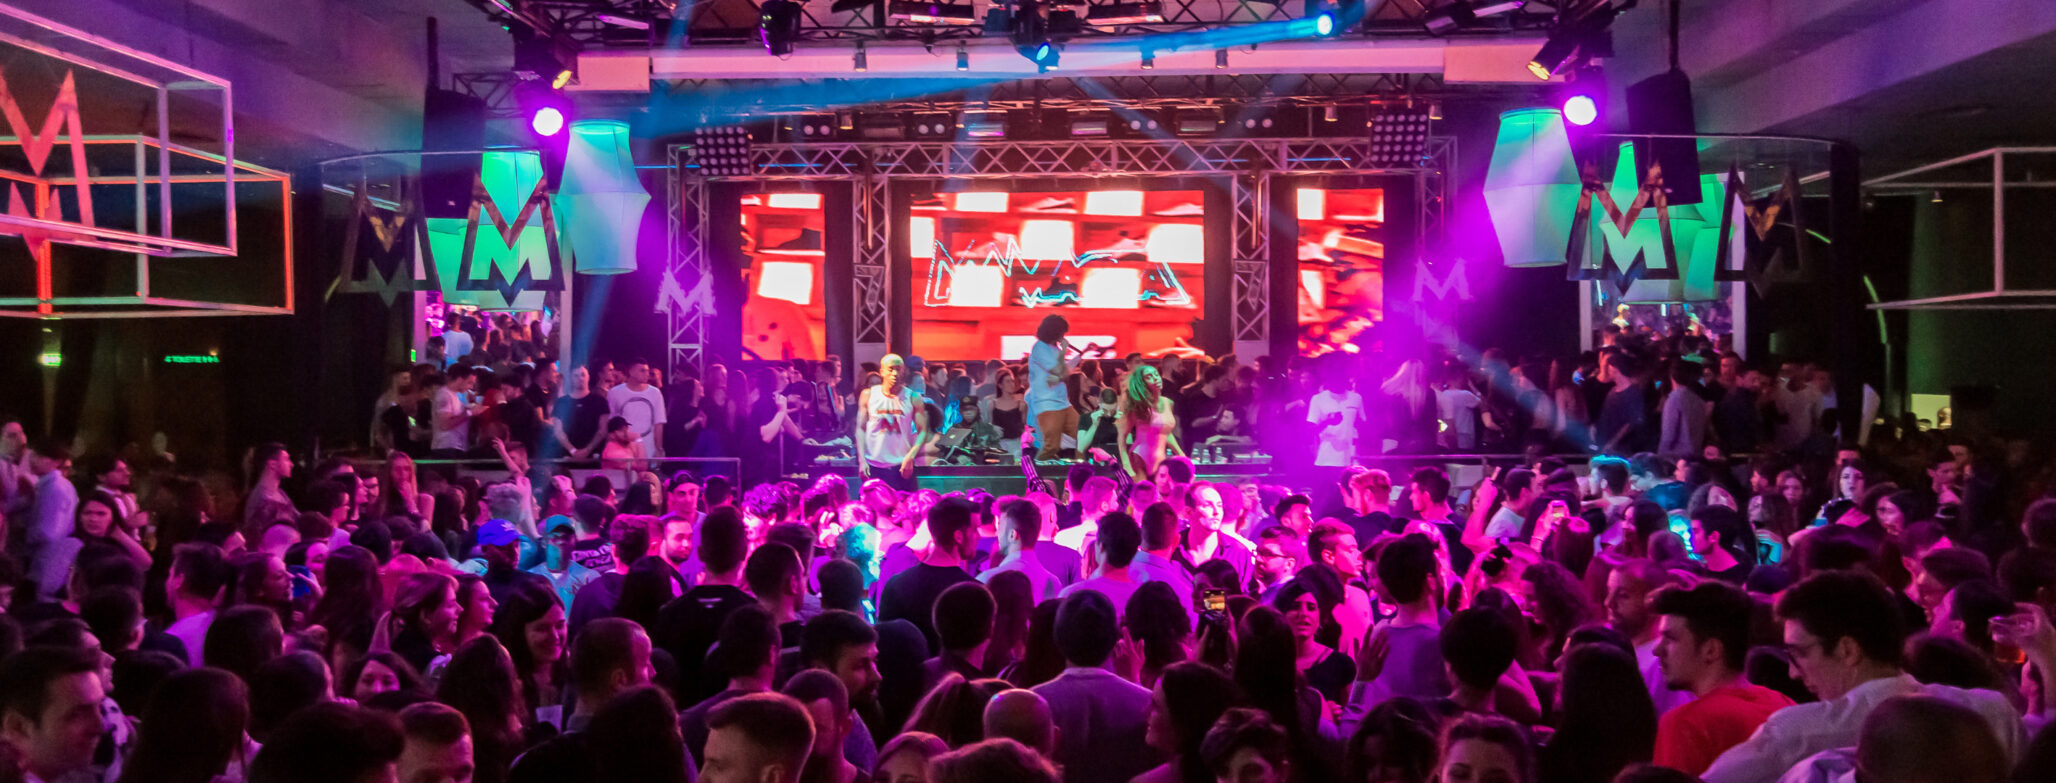 7 nightclub safety tips for insurance producers